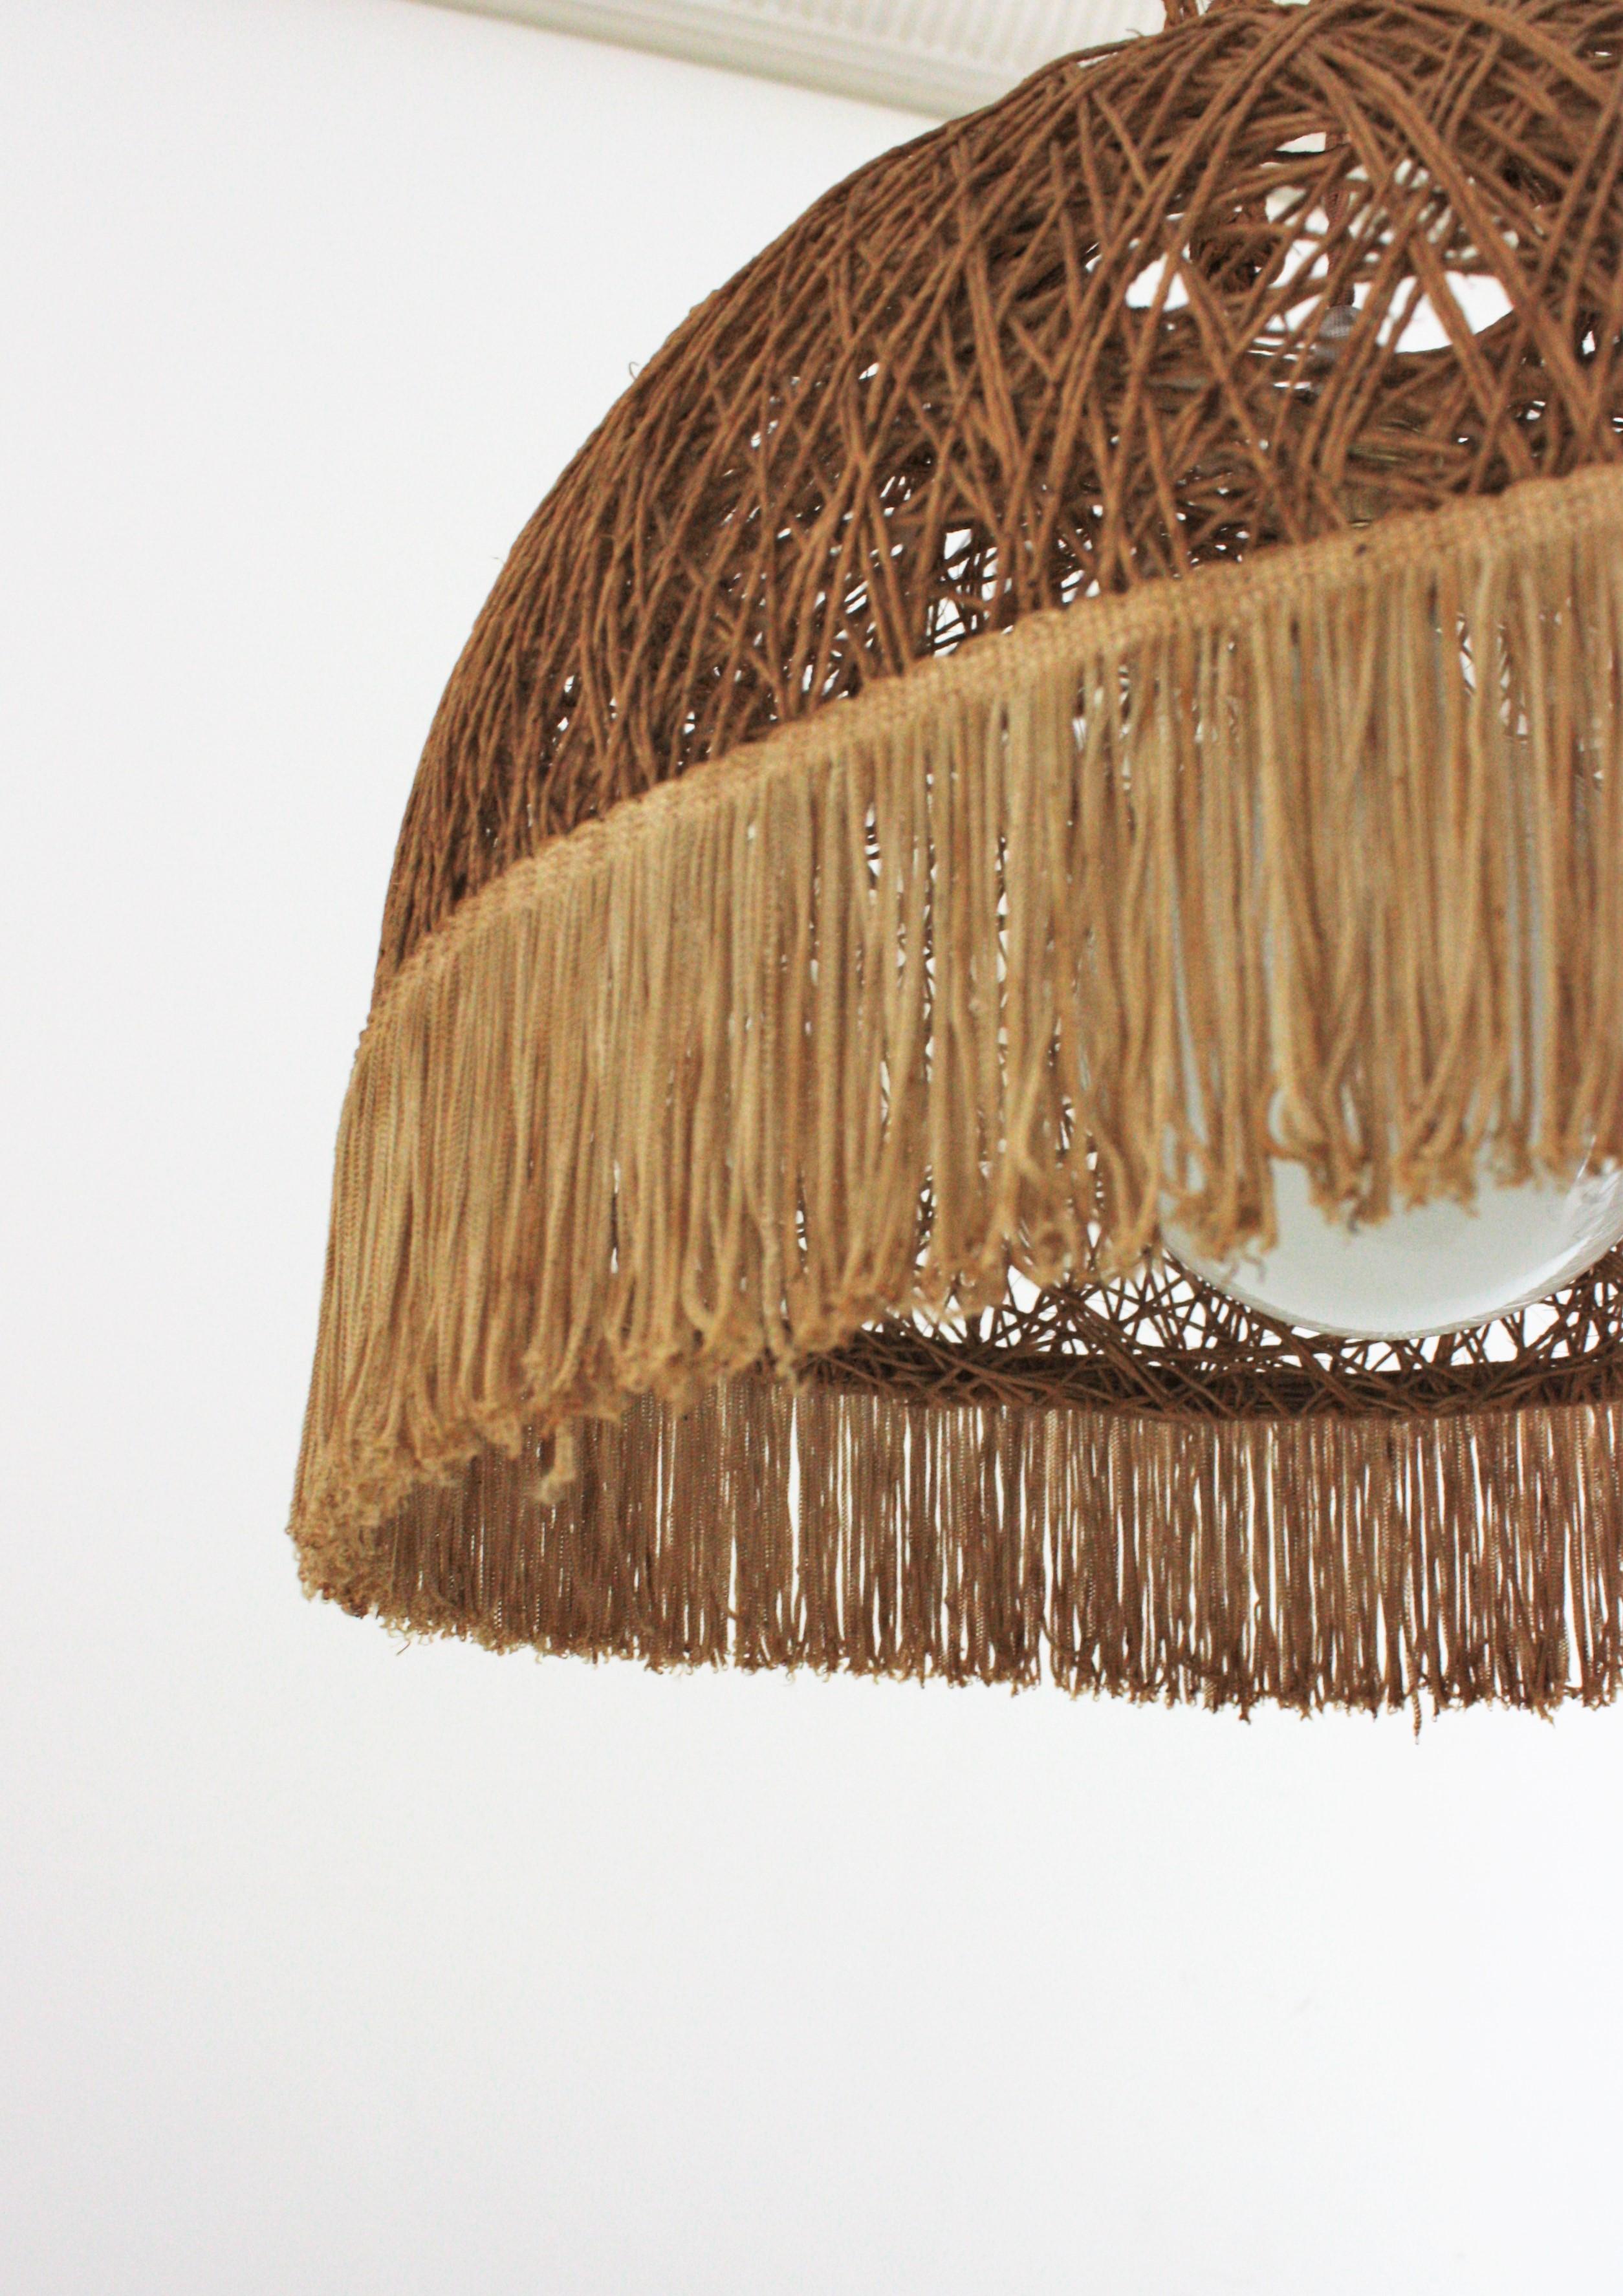 Spanish Rope Hand Woven Pendant Lamp / Suspension with Fringe For Sale 7